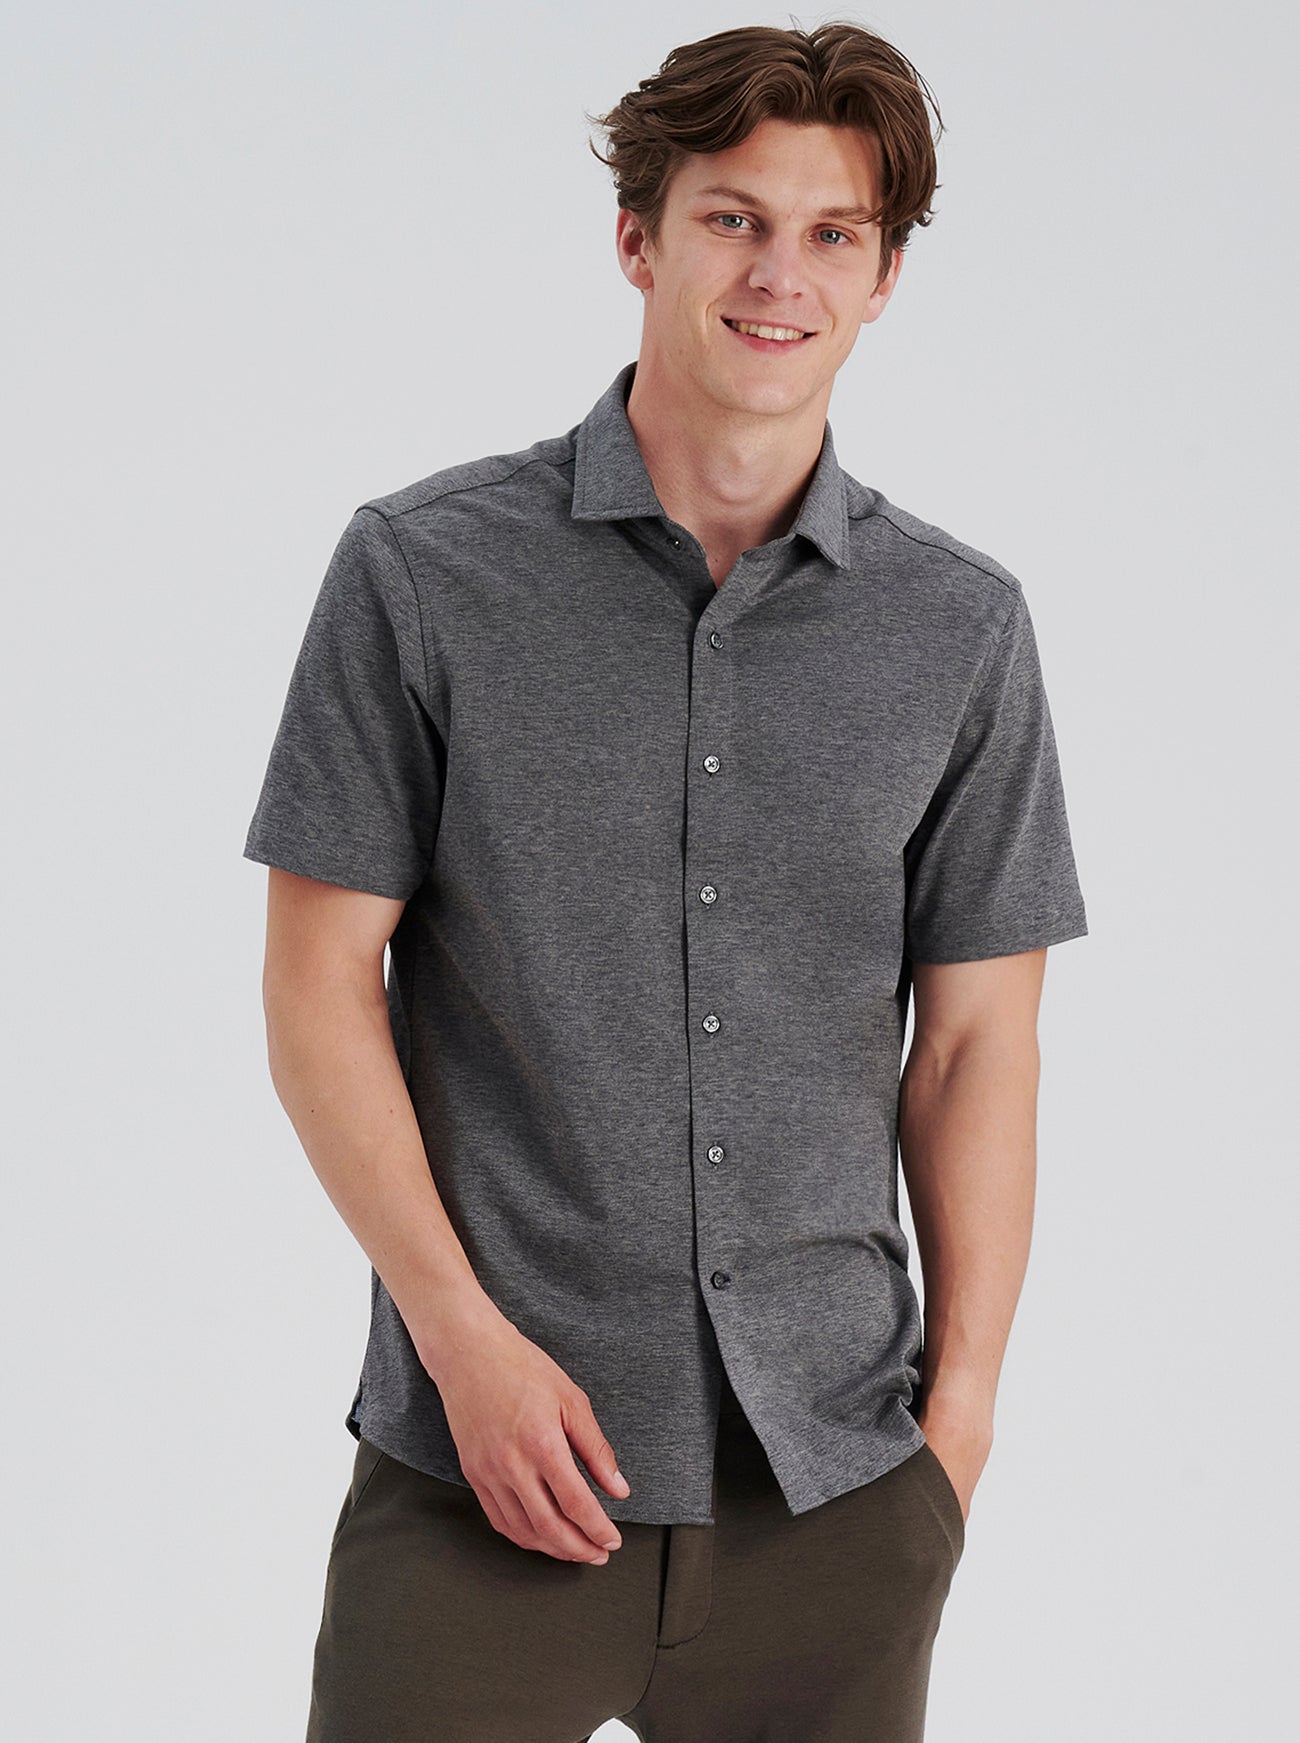 Performance Knit Short Sleeve Shirt Solid Button Down - Slim Fit